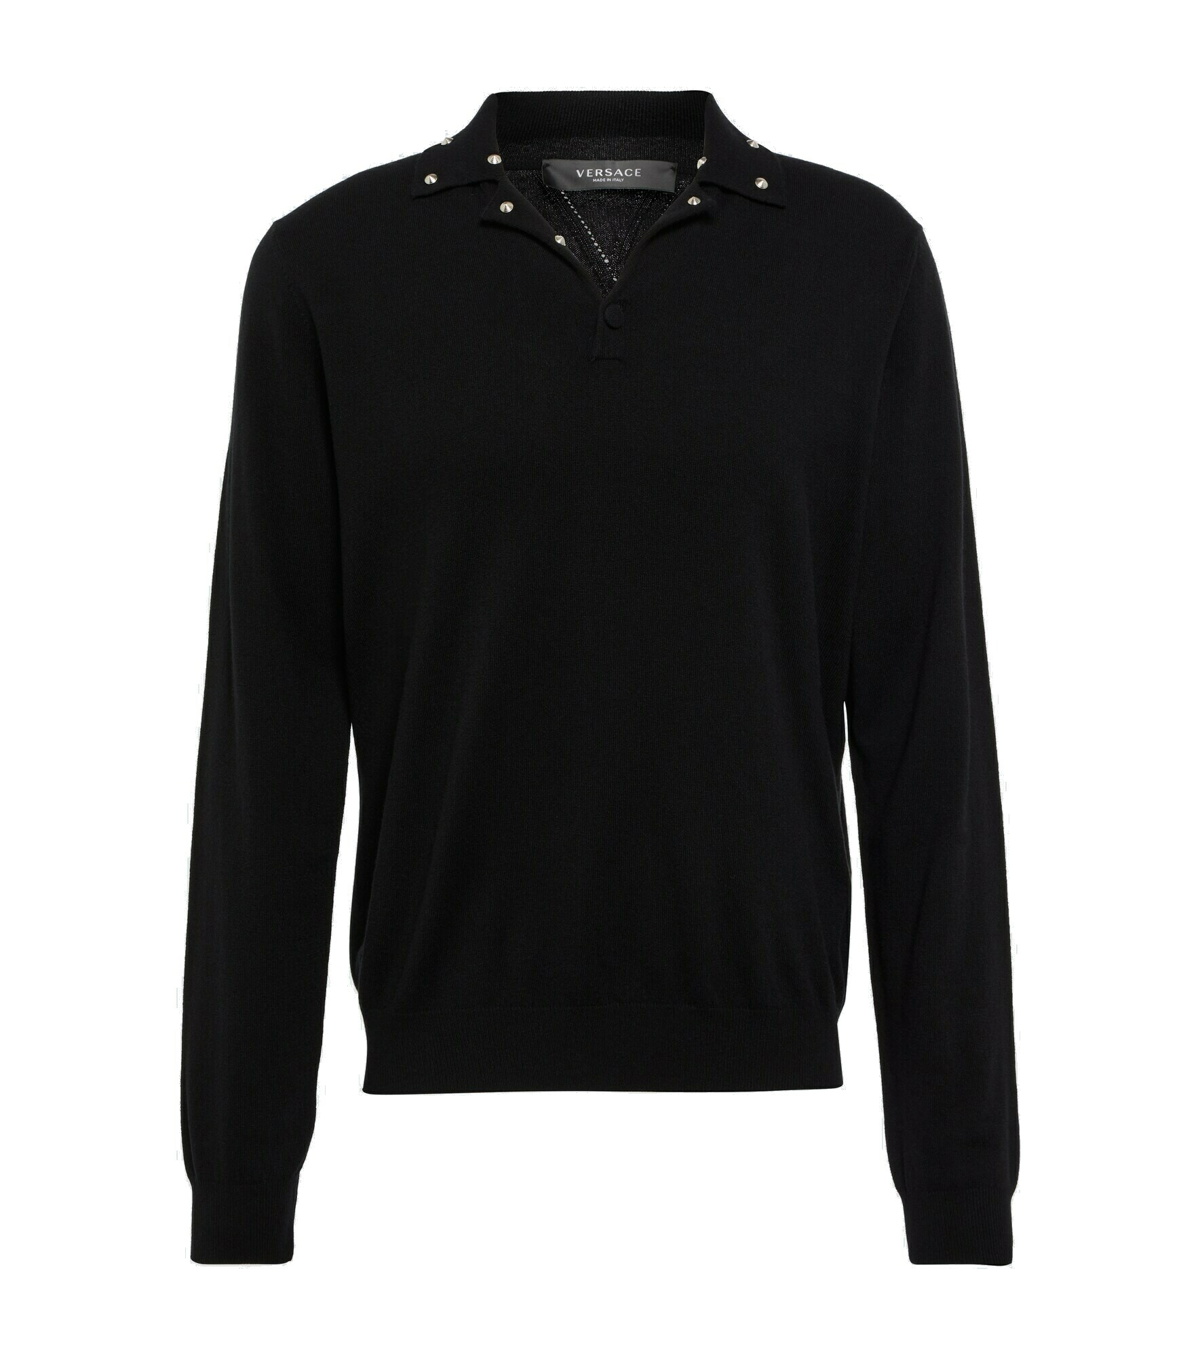 Versace - Embellished wool and cashmere sweater Versace